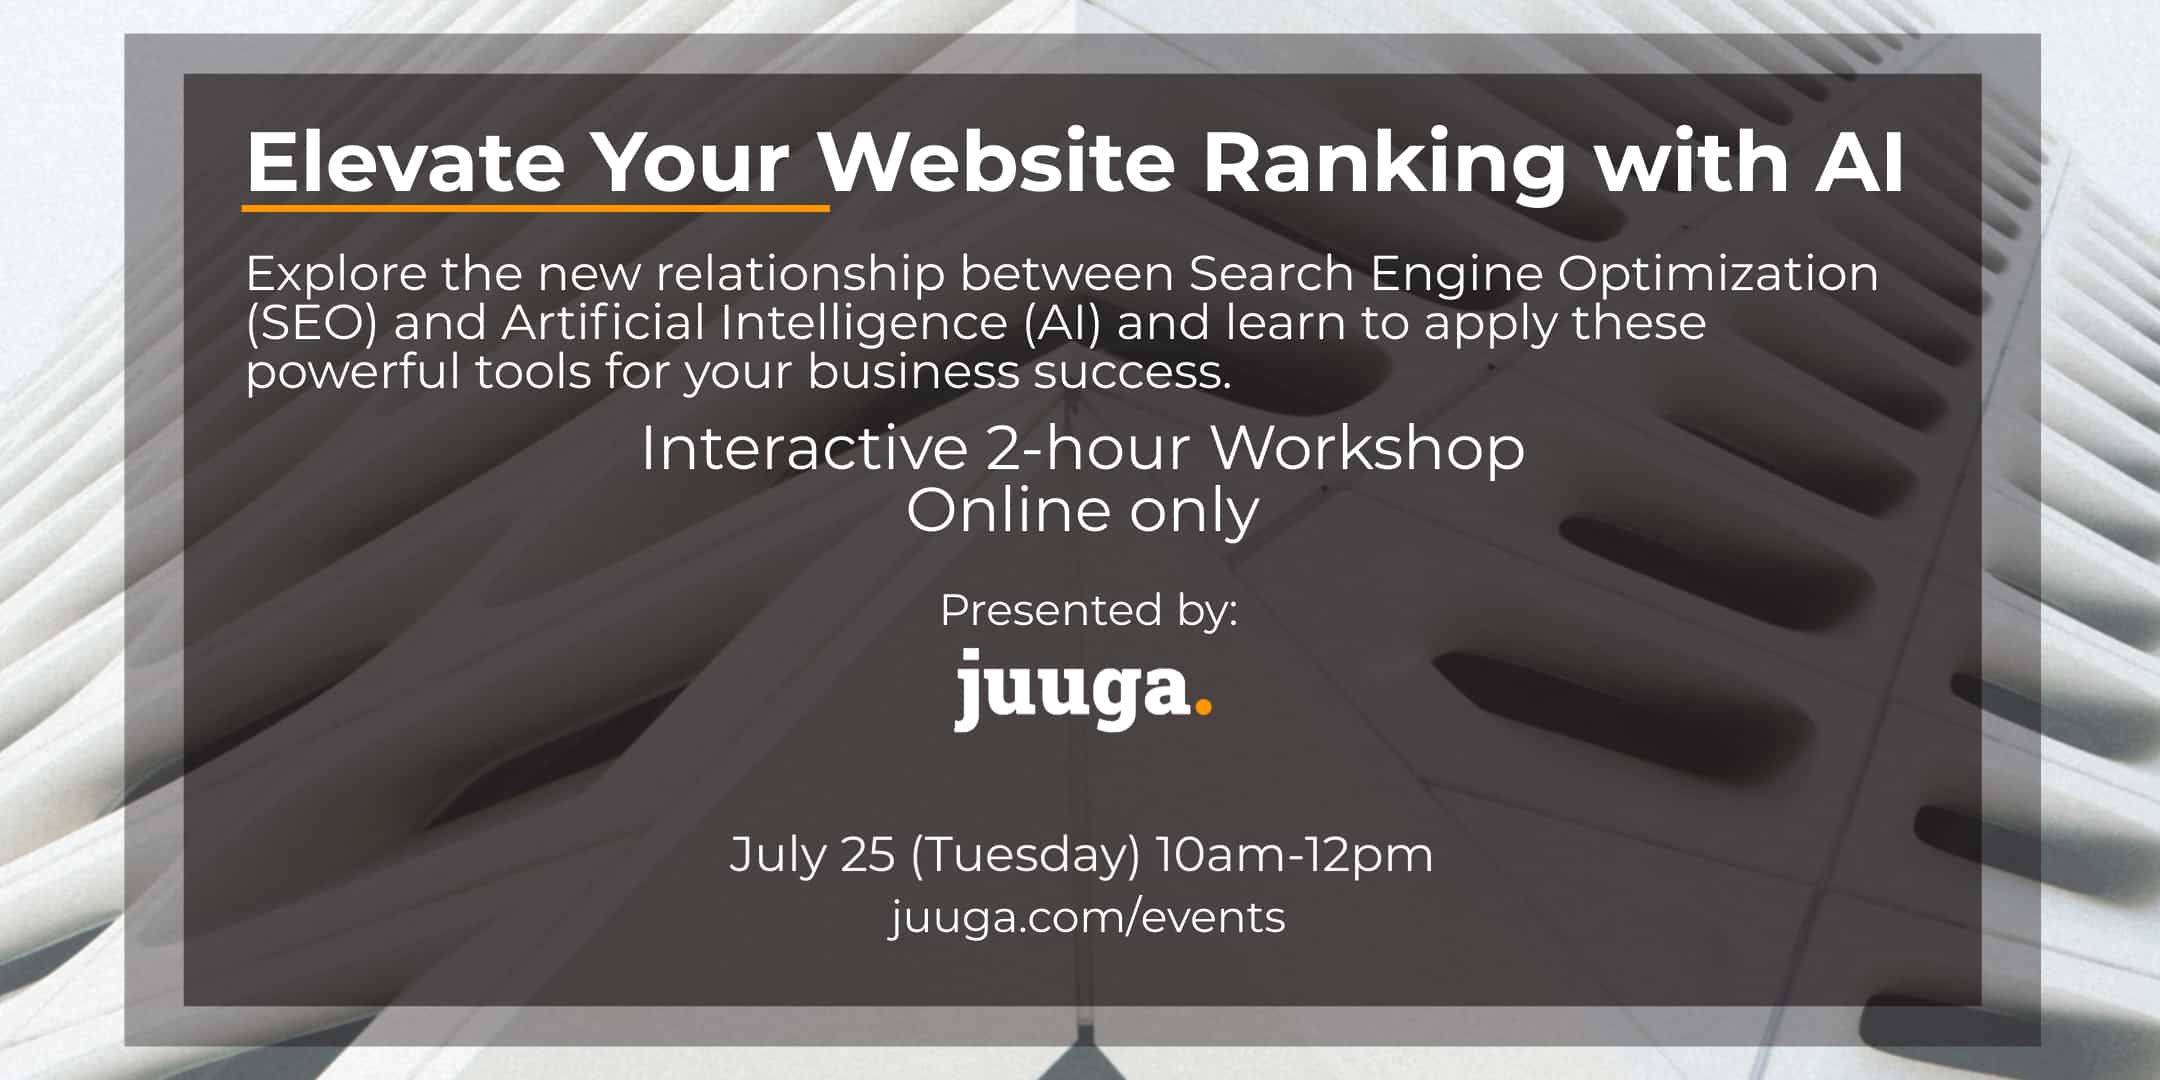 Elevate Your Website Ranking Online with AI - Juuga Marketing Workshop